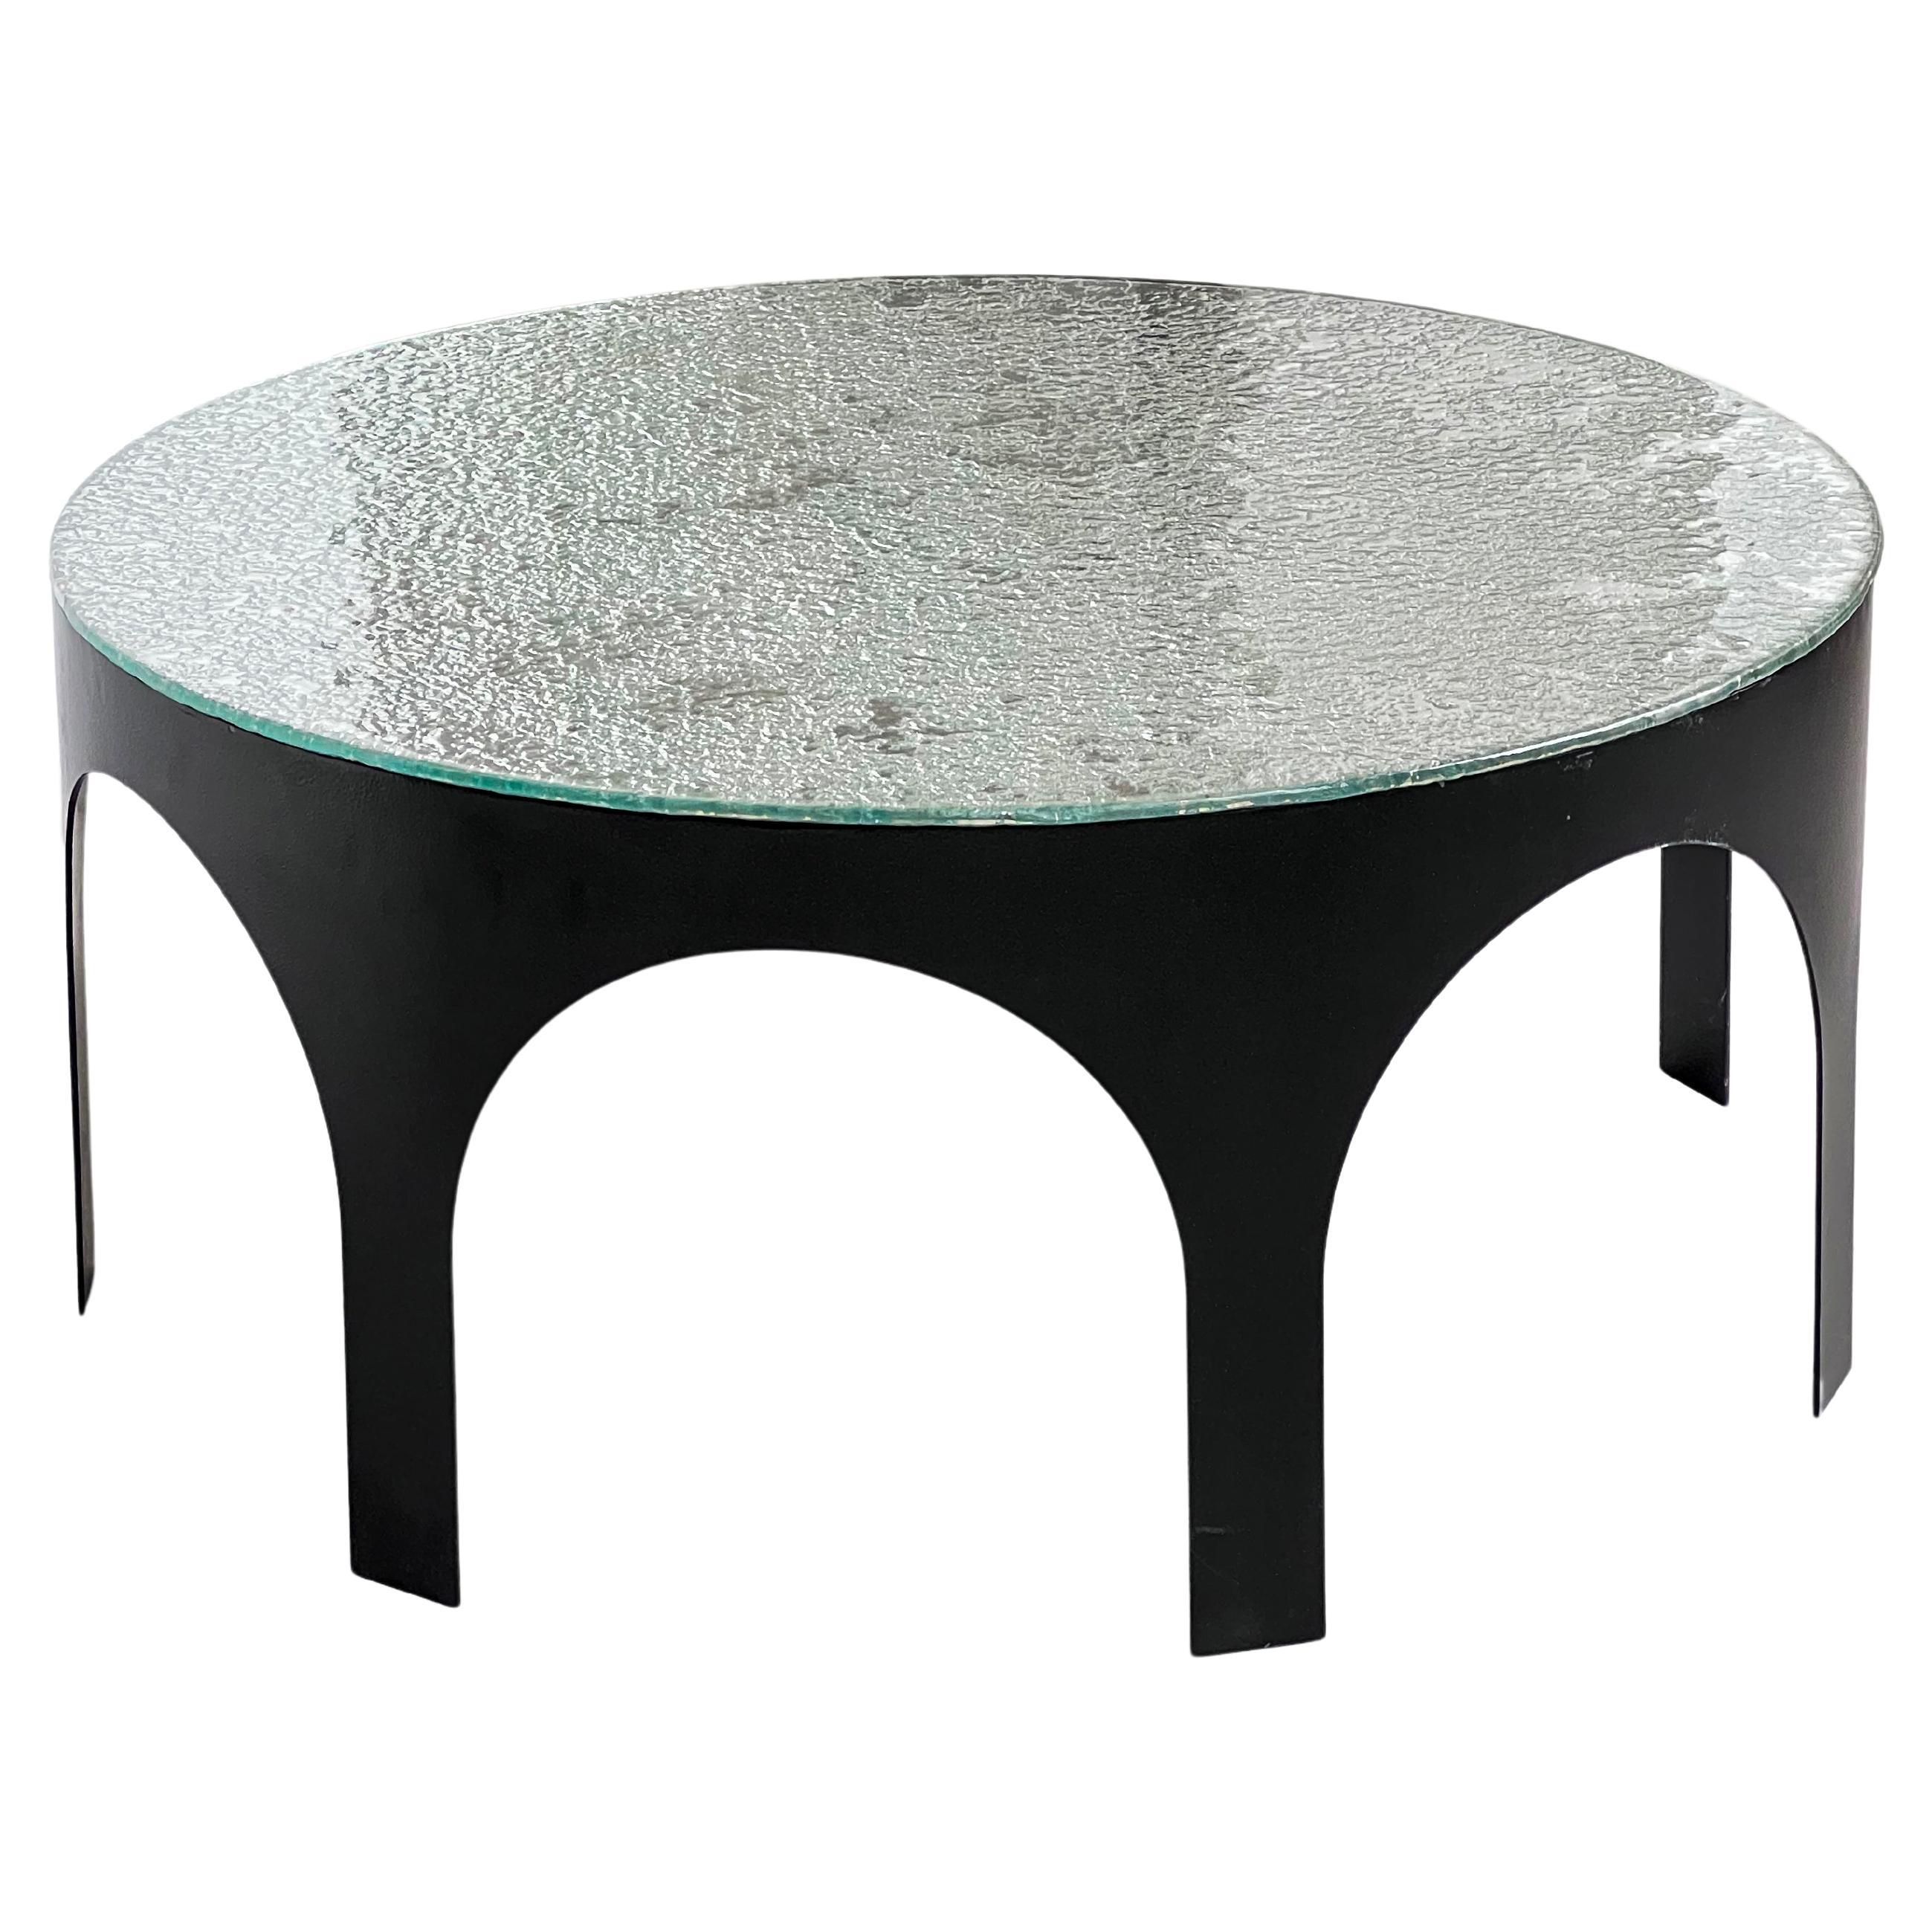 Italian Arches Coffee Table with silver hand made glass - Made in Milano